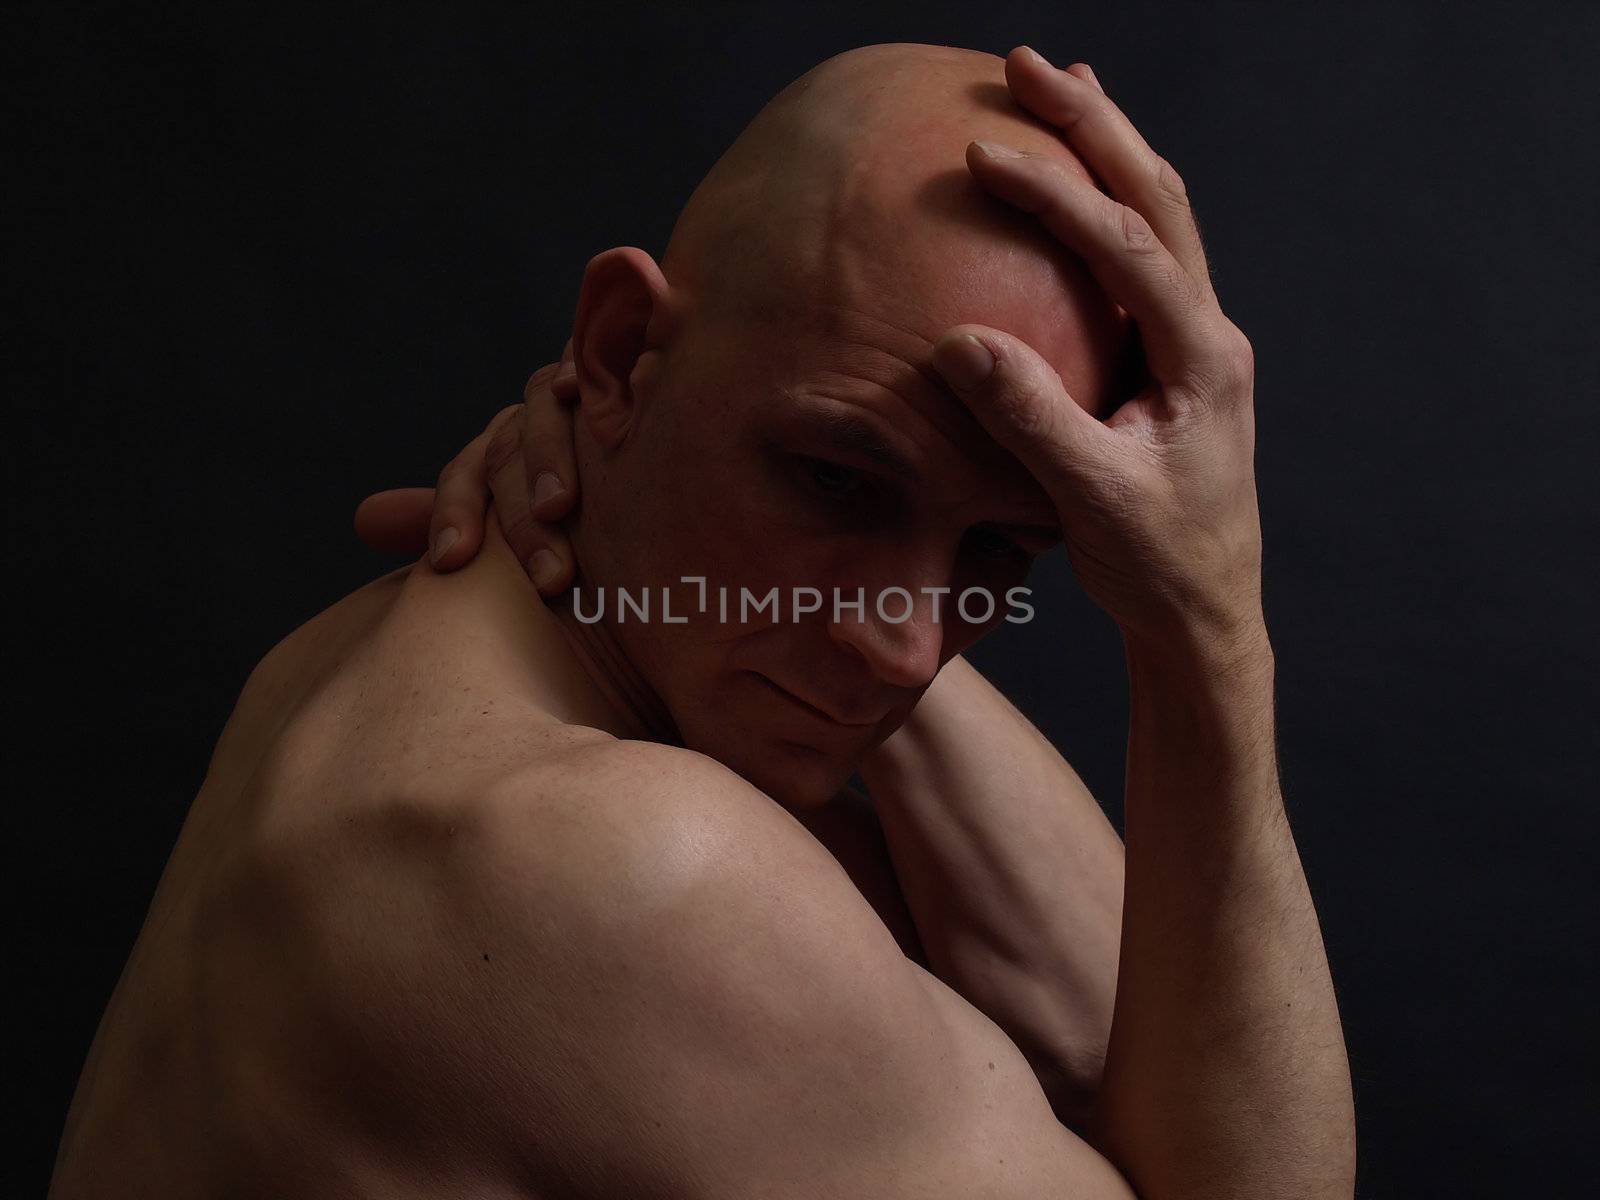 A nude bald male in the shadows over a black background.